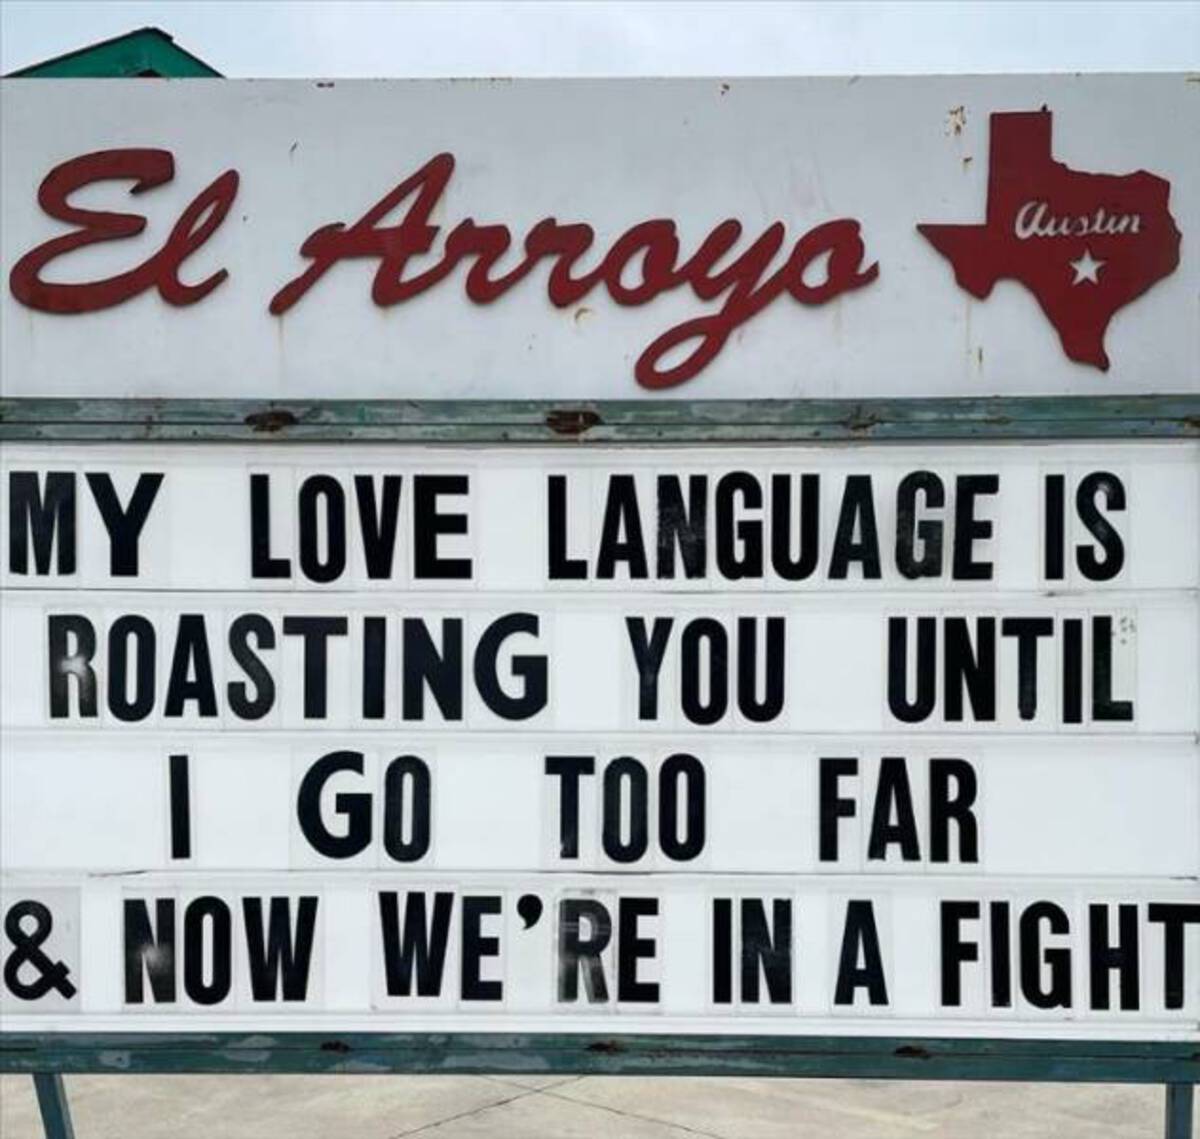 banner - El Arroyo Austin My Love Language Is Roasting You Until I Go Too Far & Now We'Re In A Fight